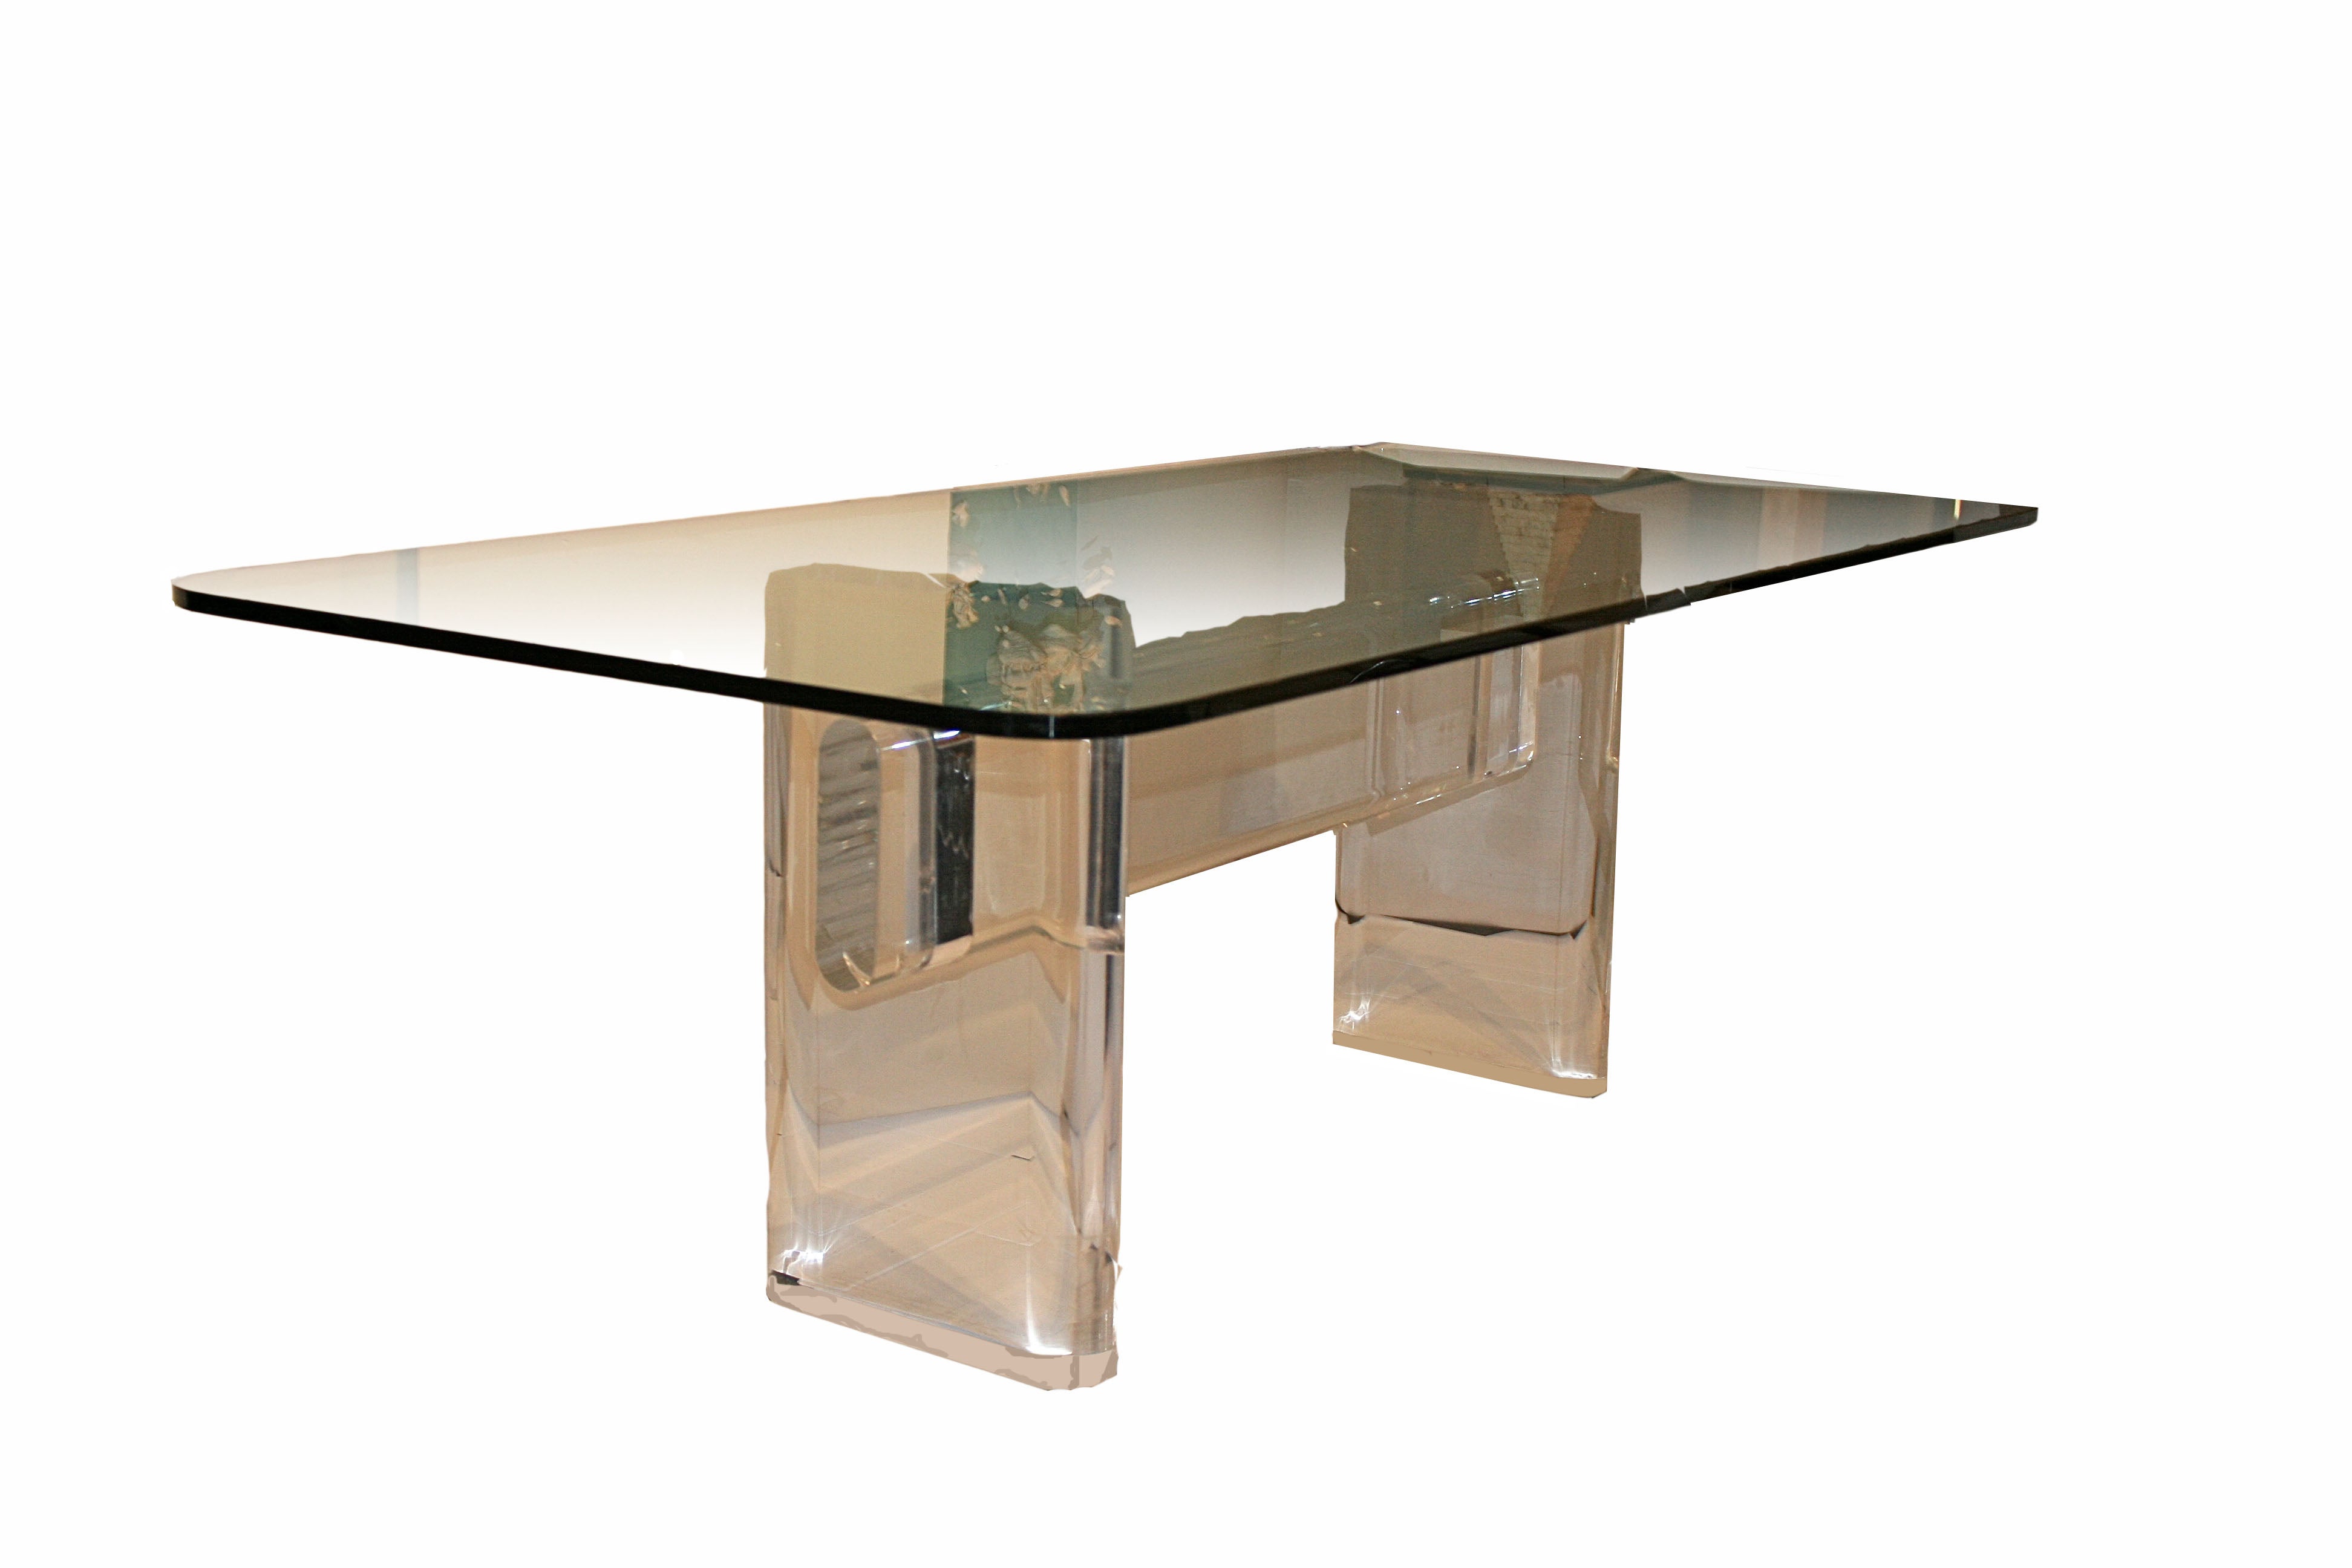 Lucite Dining Table by Karl Springer, USA, c. 1980s